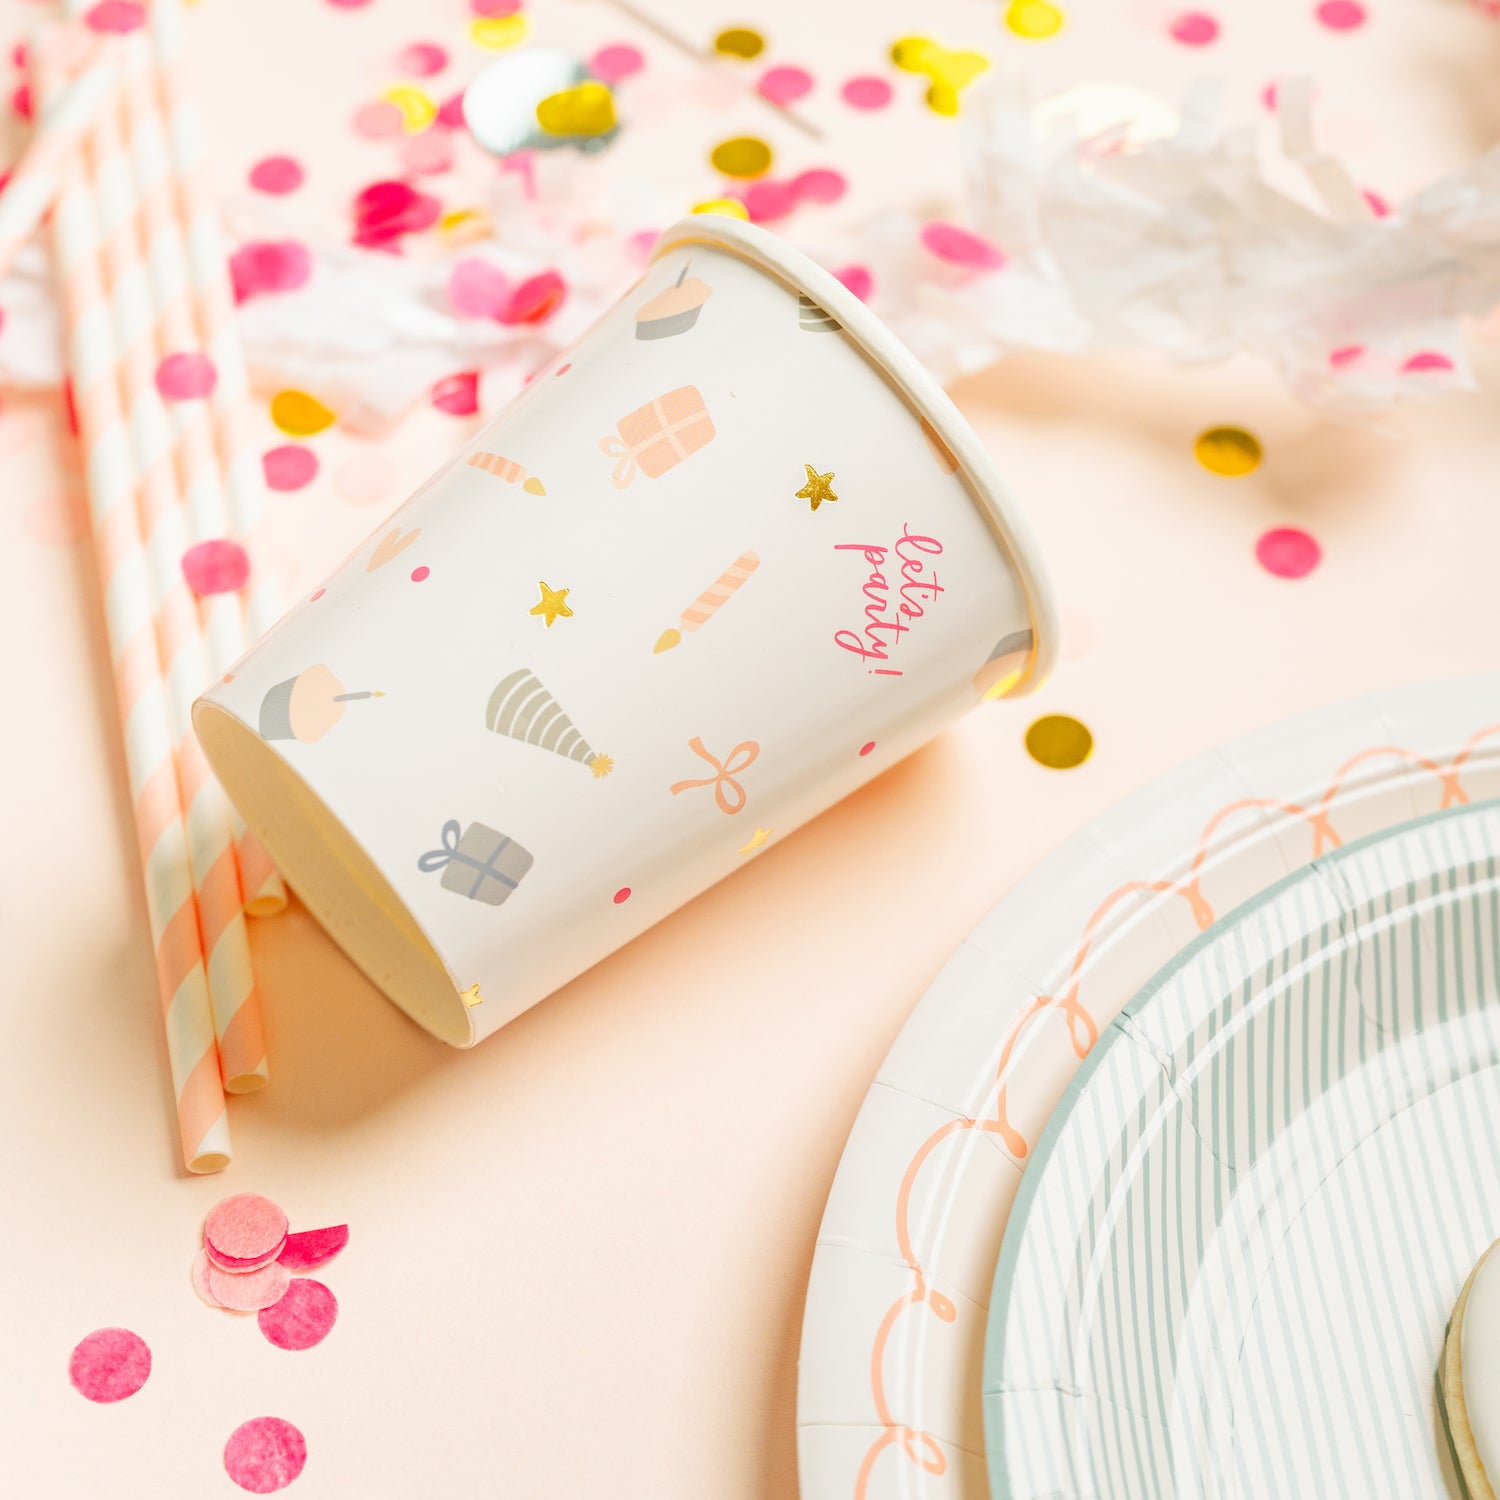 birthday party icon cup with confetti and party paper plates in pink and blue